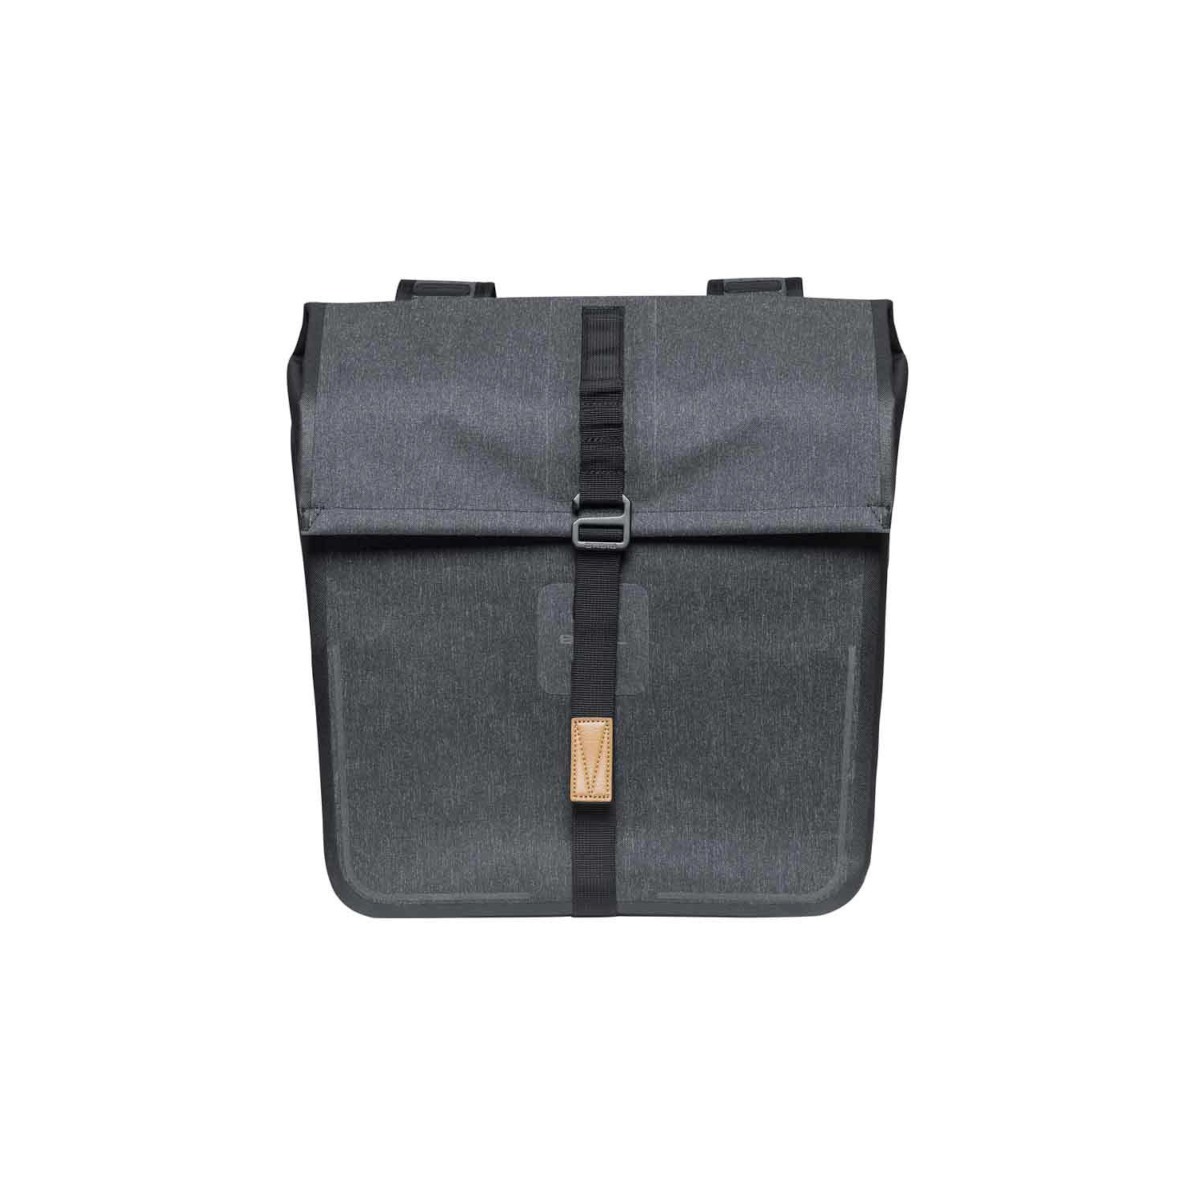 Basil SACOCHE ARRIERE DOUBLE URBAN DRY 48L CHARCOAL GRIS ANTHRACITE 100% WATERPROOF